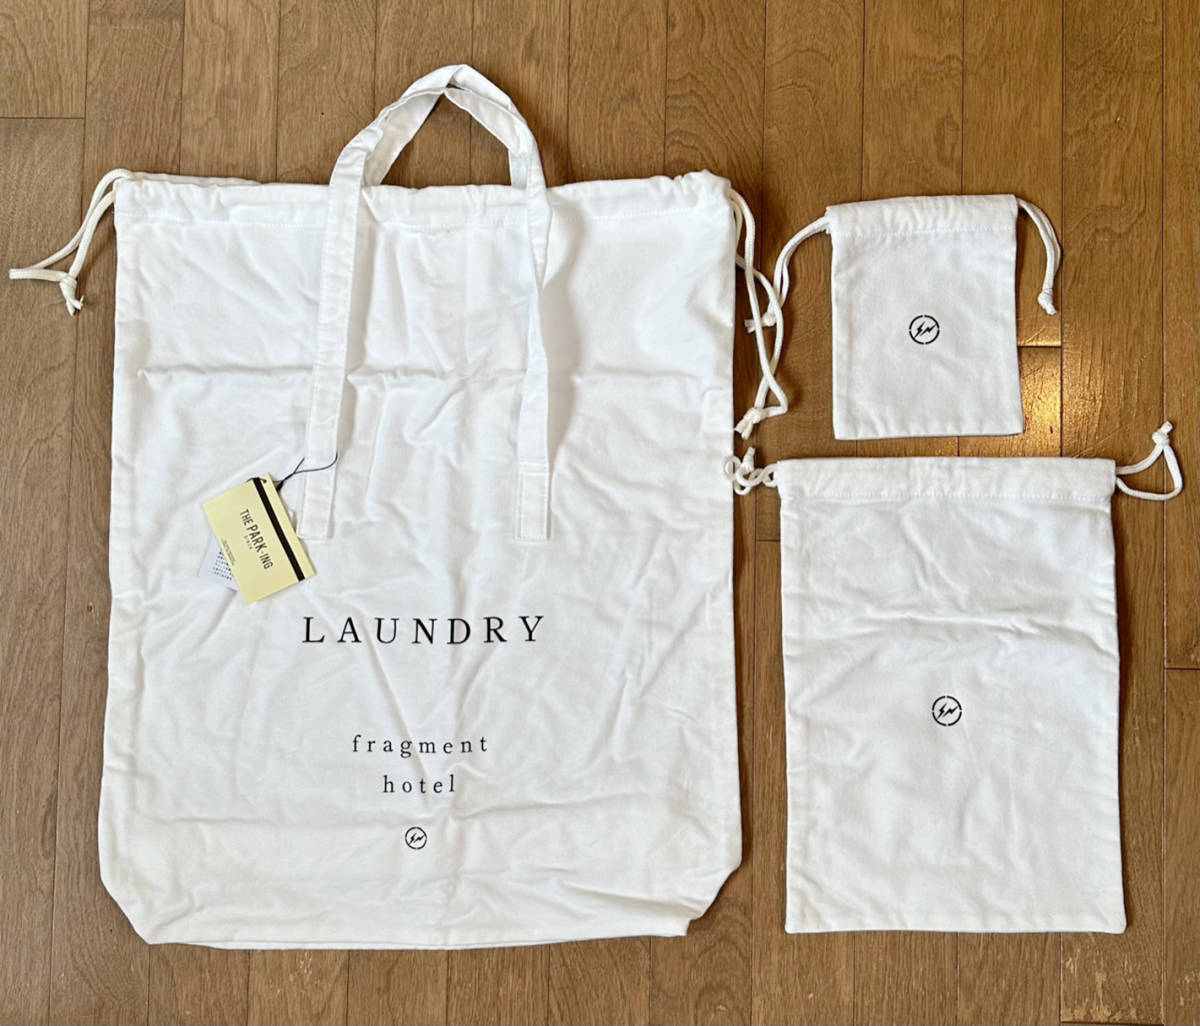 ■THE PARK-ING GINZA 新品 Fragment Horel LAUNDRY BAG & POUCH 2個 セット フラグメント 藤原ヒロシ_画像1